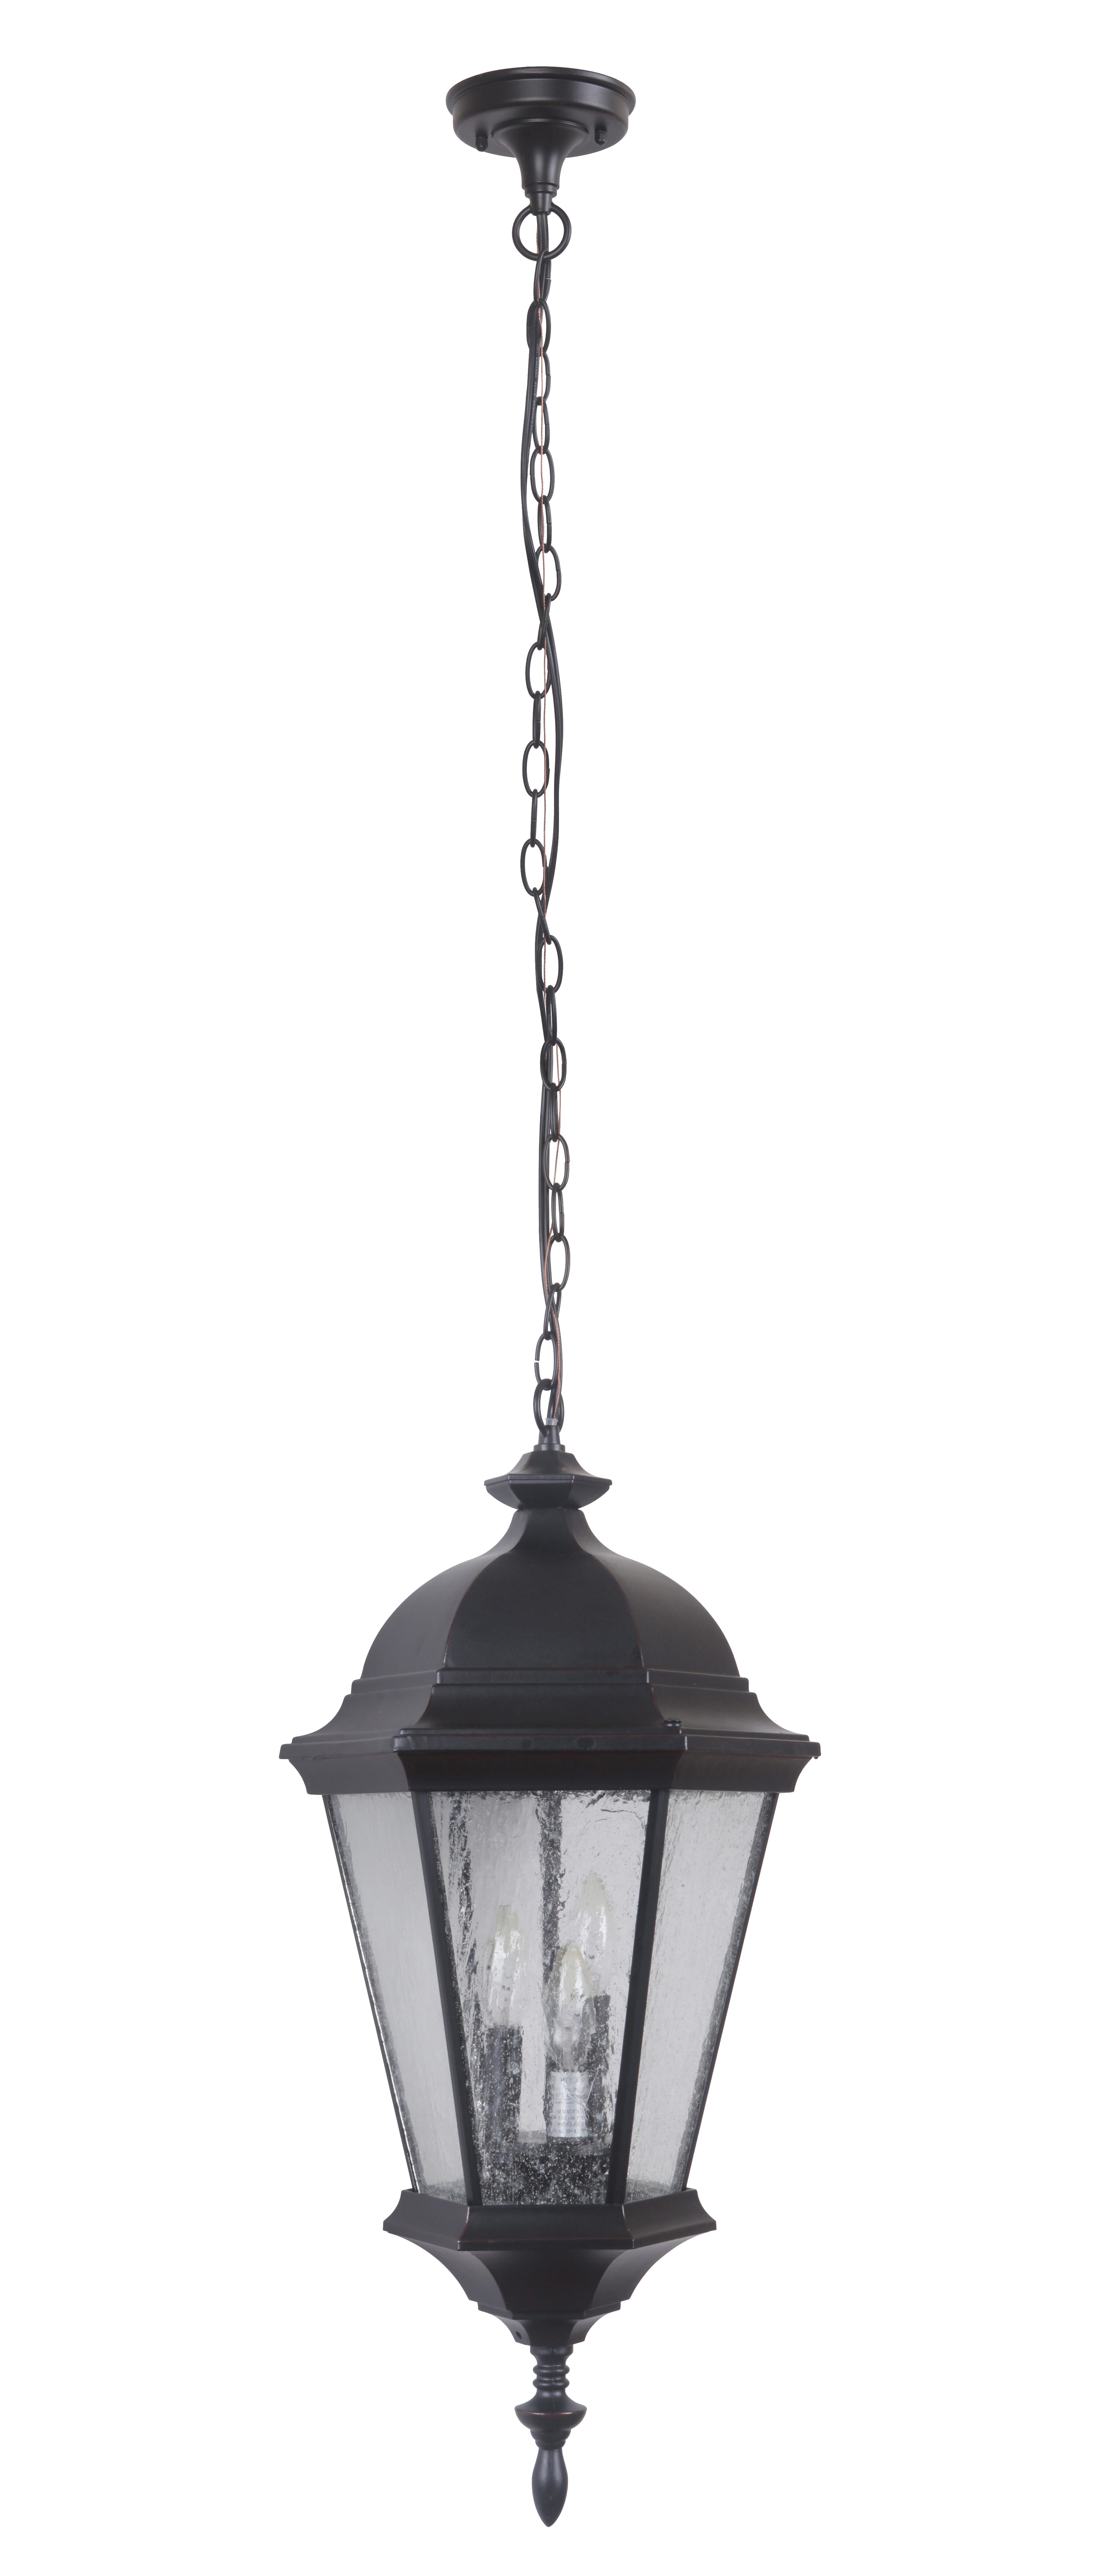 Craftmade Chadwick 29"" Outdoor Hanging Light in Oiled Bronze Gilded -  Z2921-OBG